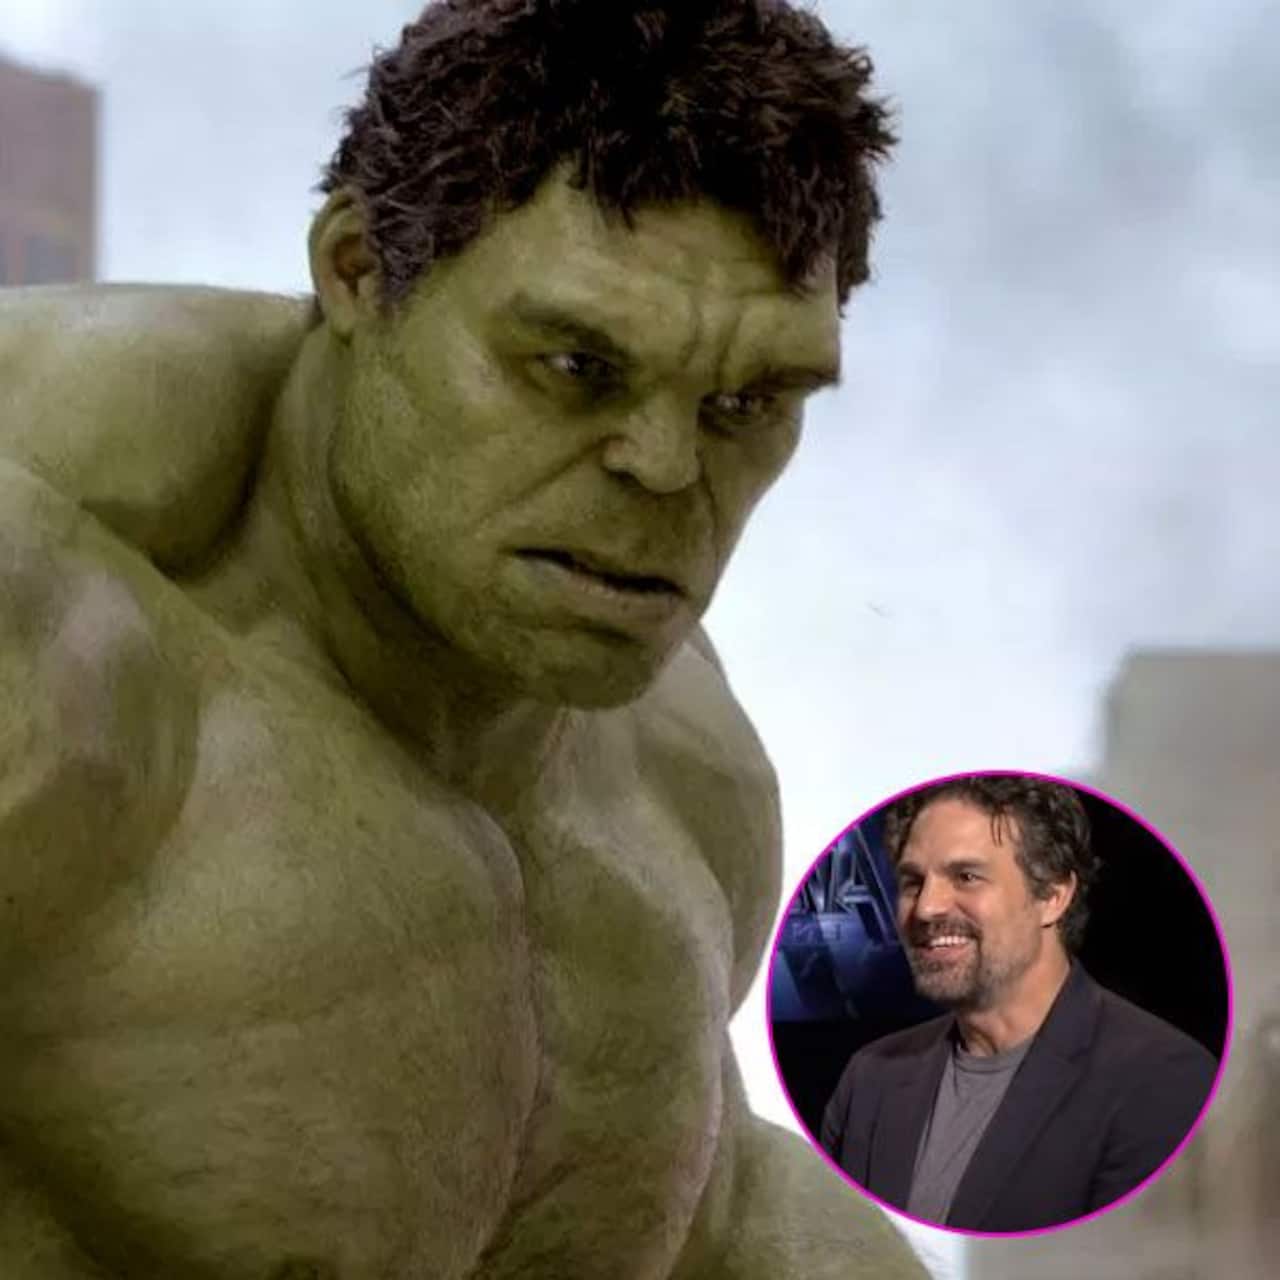 Mark Ruffalo with his loose lips is most likely to spoil the end of  Avengers: Endgame reveals star cast in a hilarious interview - watch video  - Bollywood News & Gossip, Movie